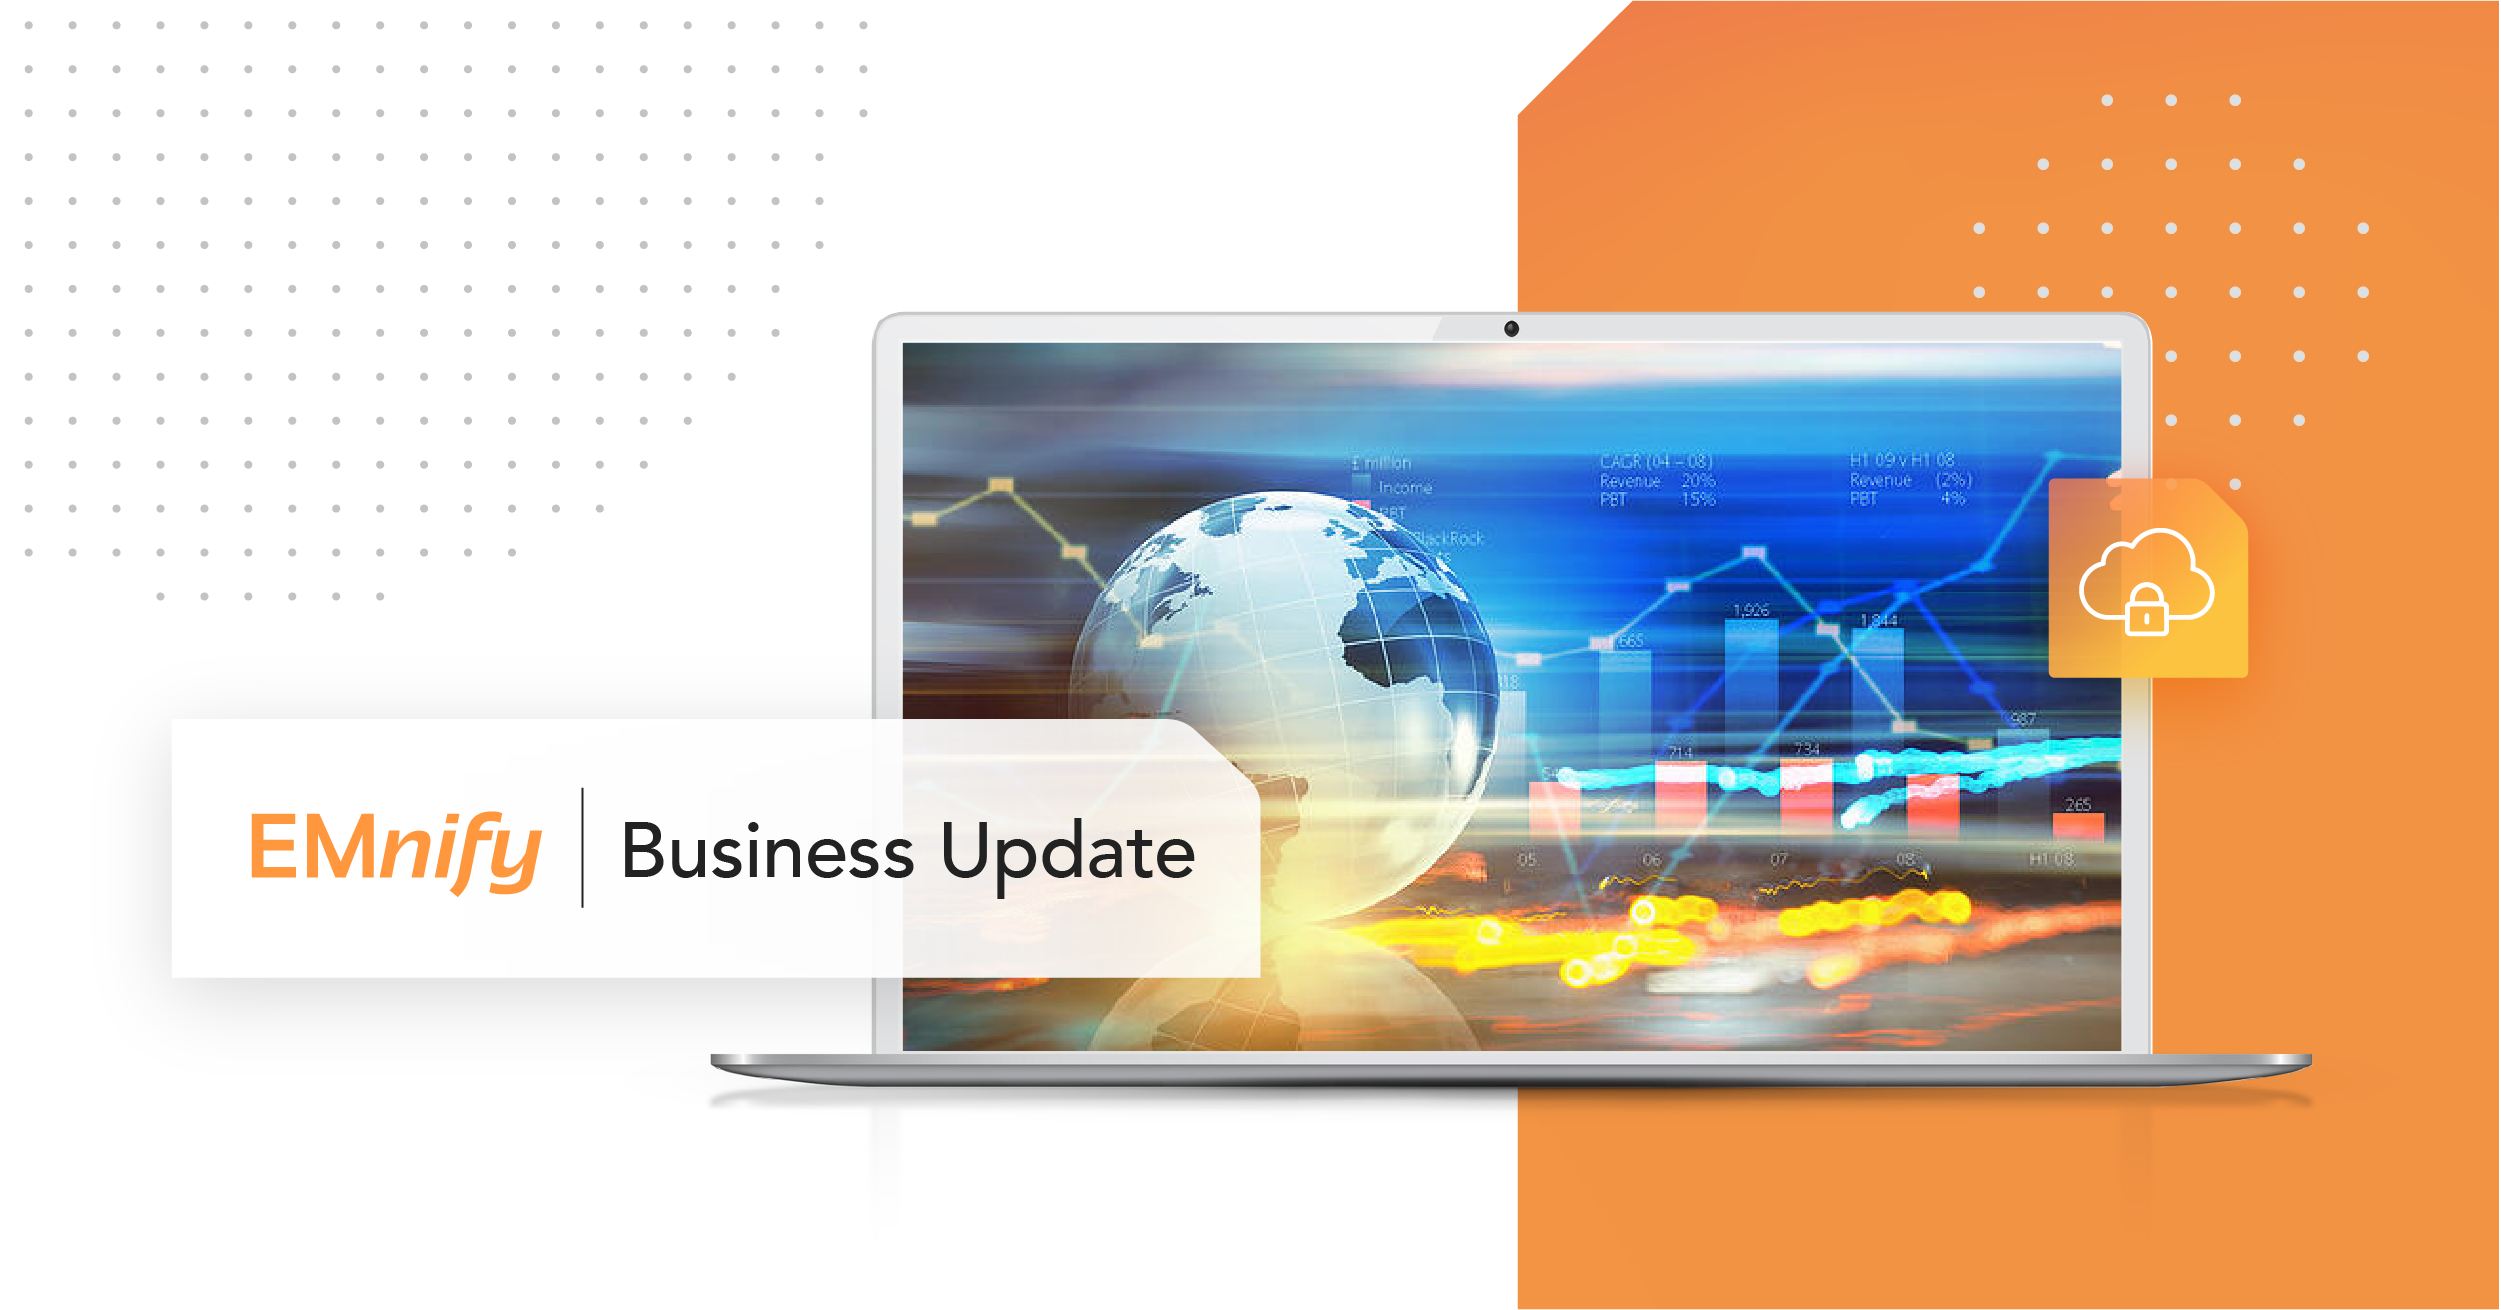 EMnify Business Update